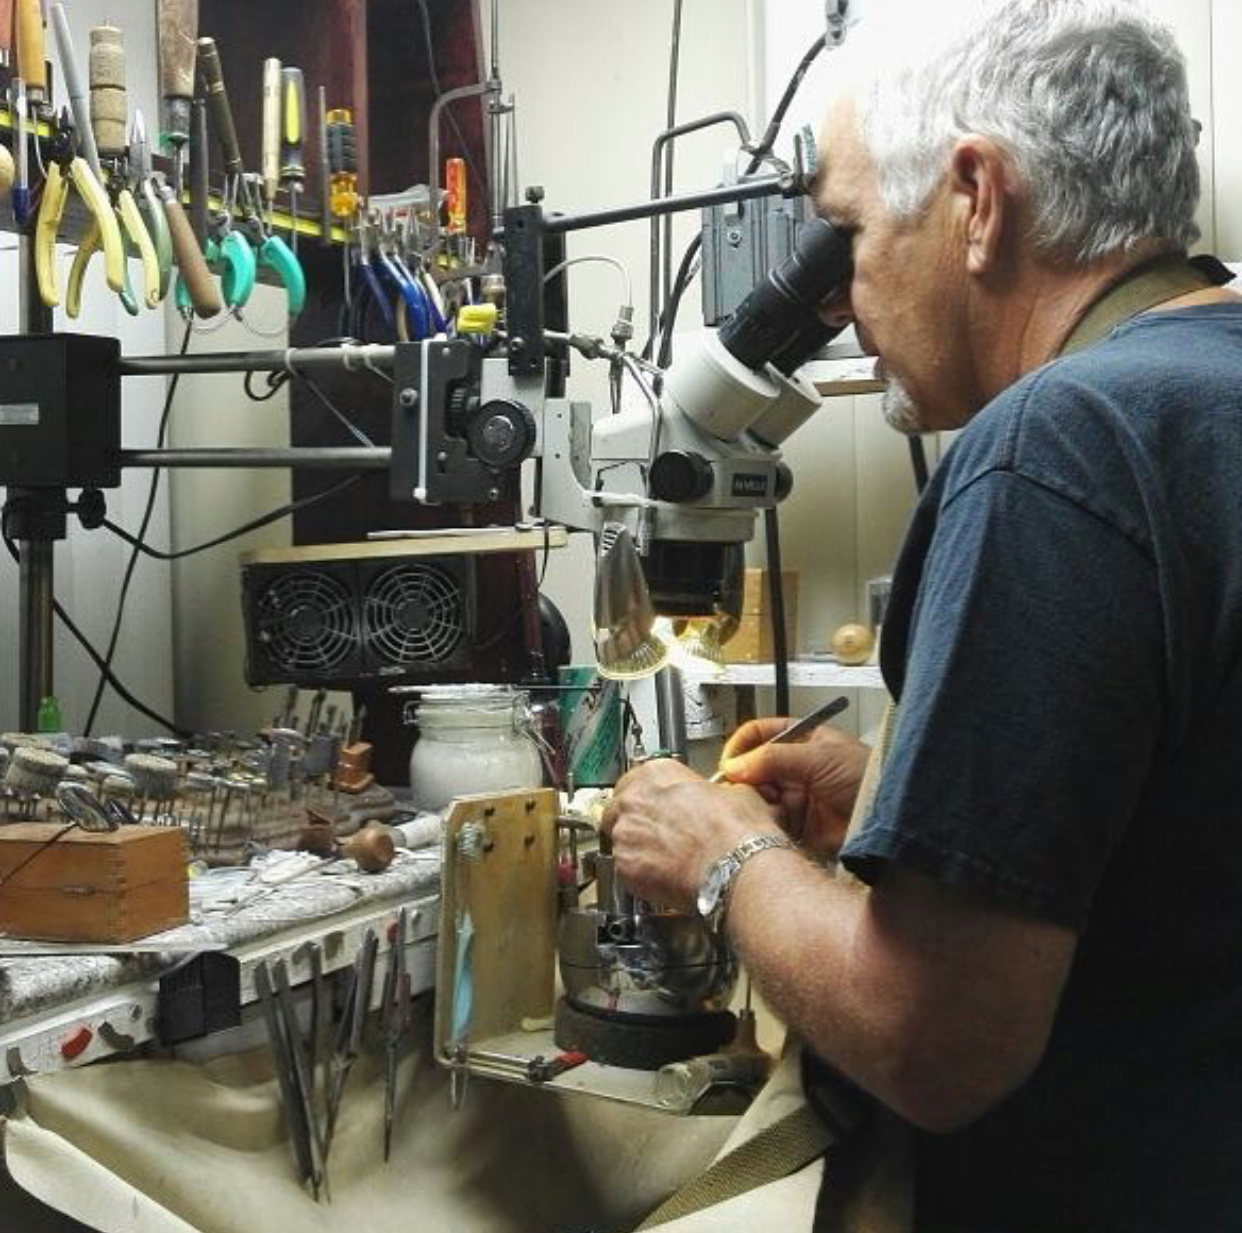 a man, Vernon Wilson, working with jewelry at a workbench using a microscope